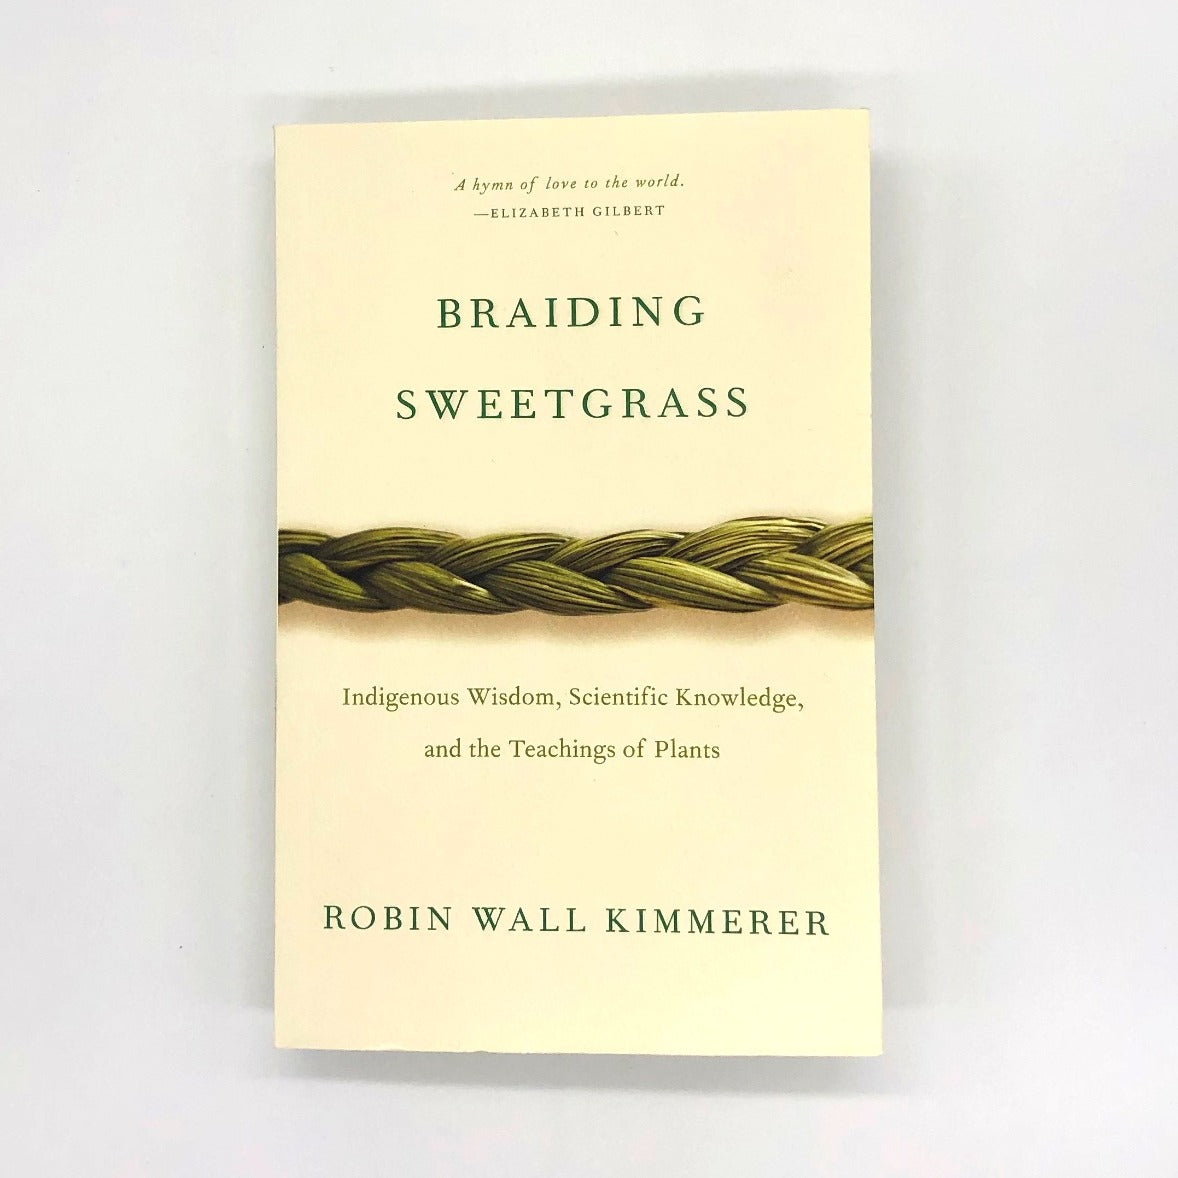 Braiding Sweetgrass by Robin Wall Kimmerer